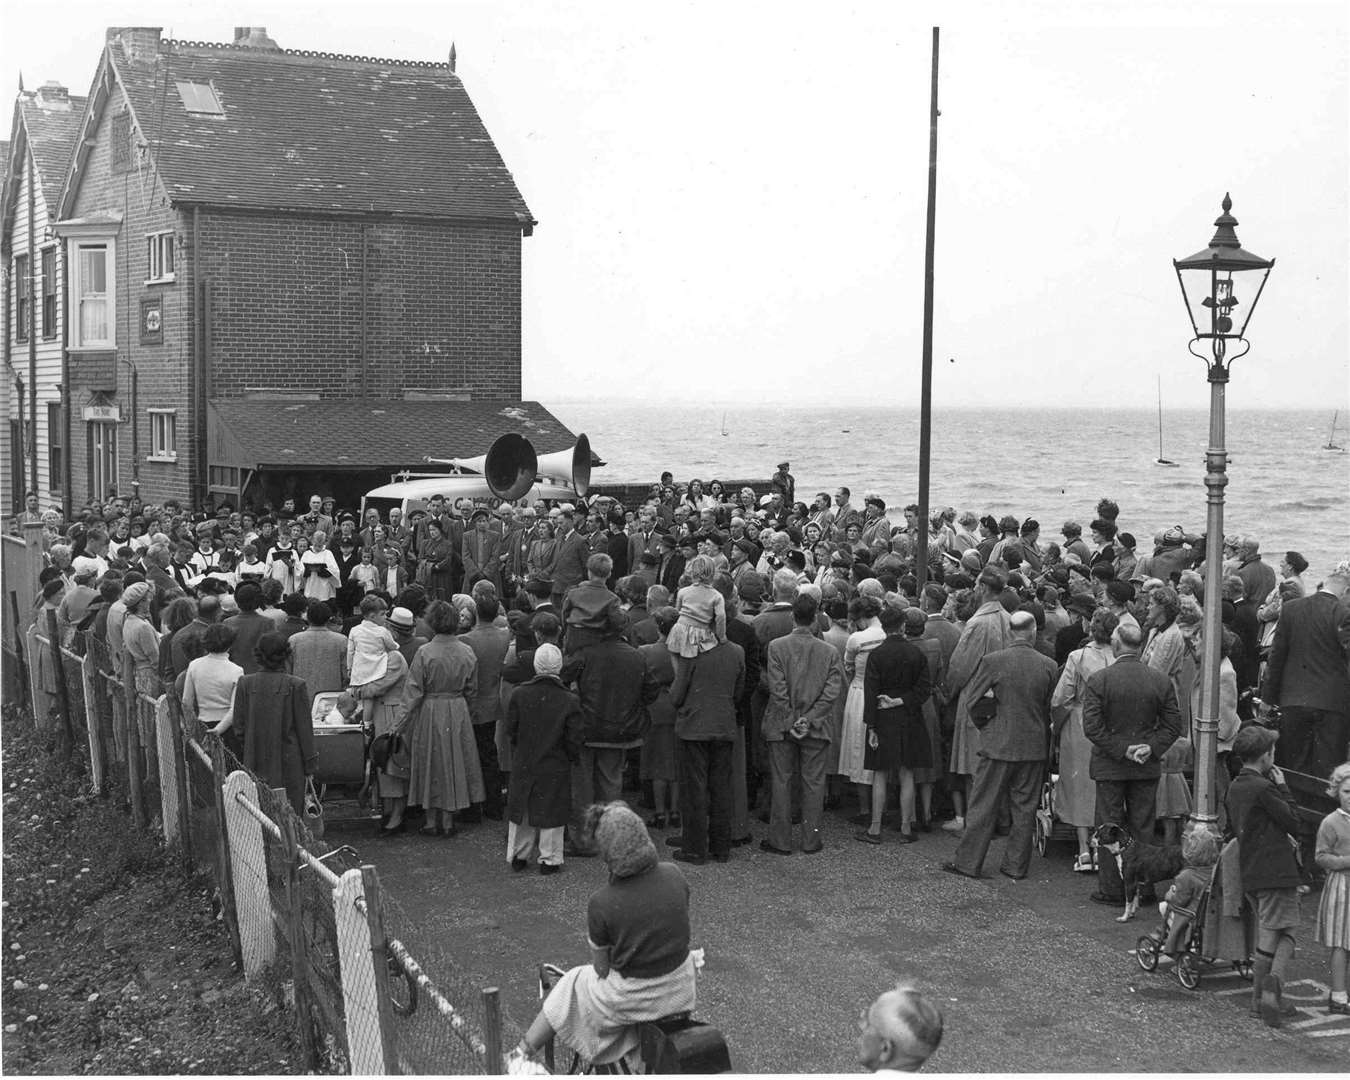 Blessing of fisheries in Whitstable in 1952